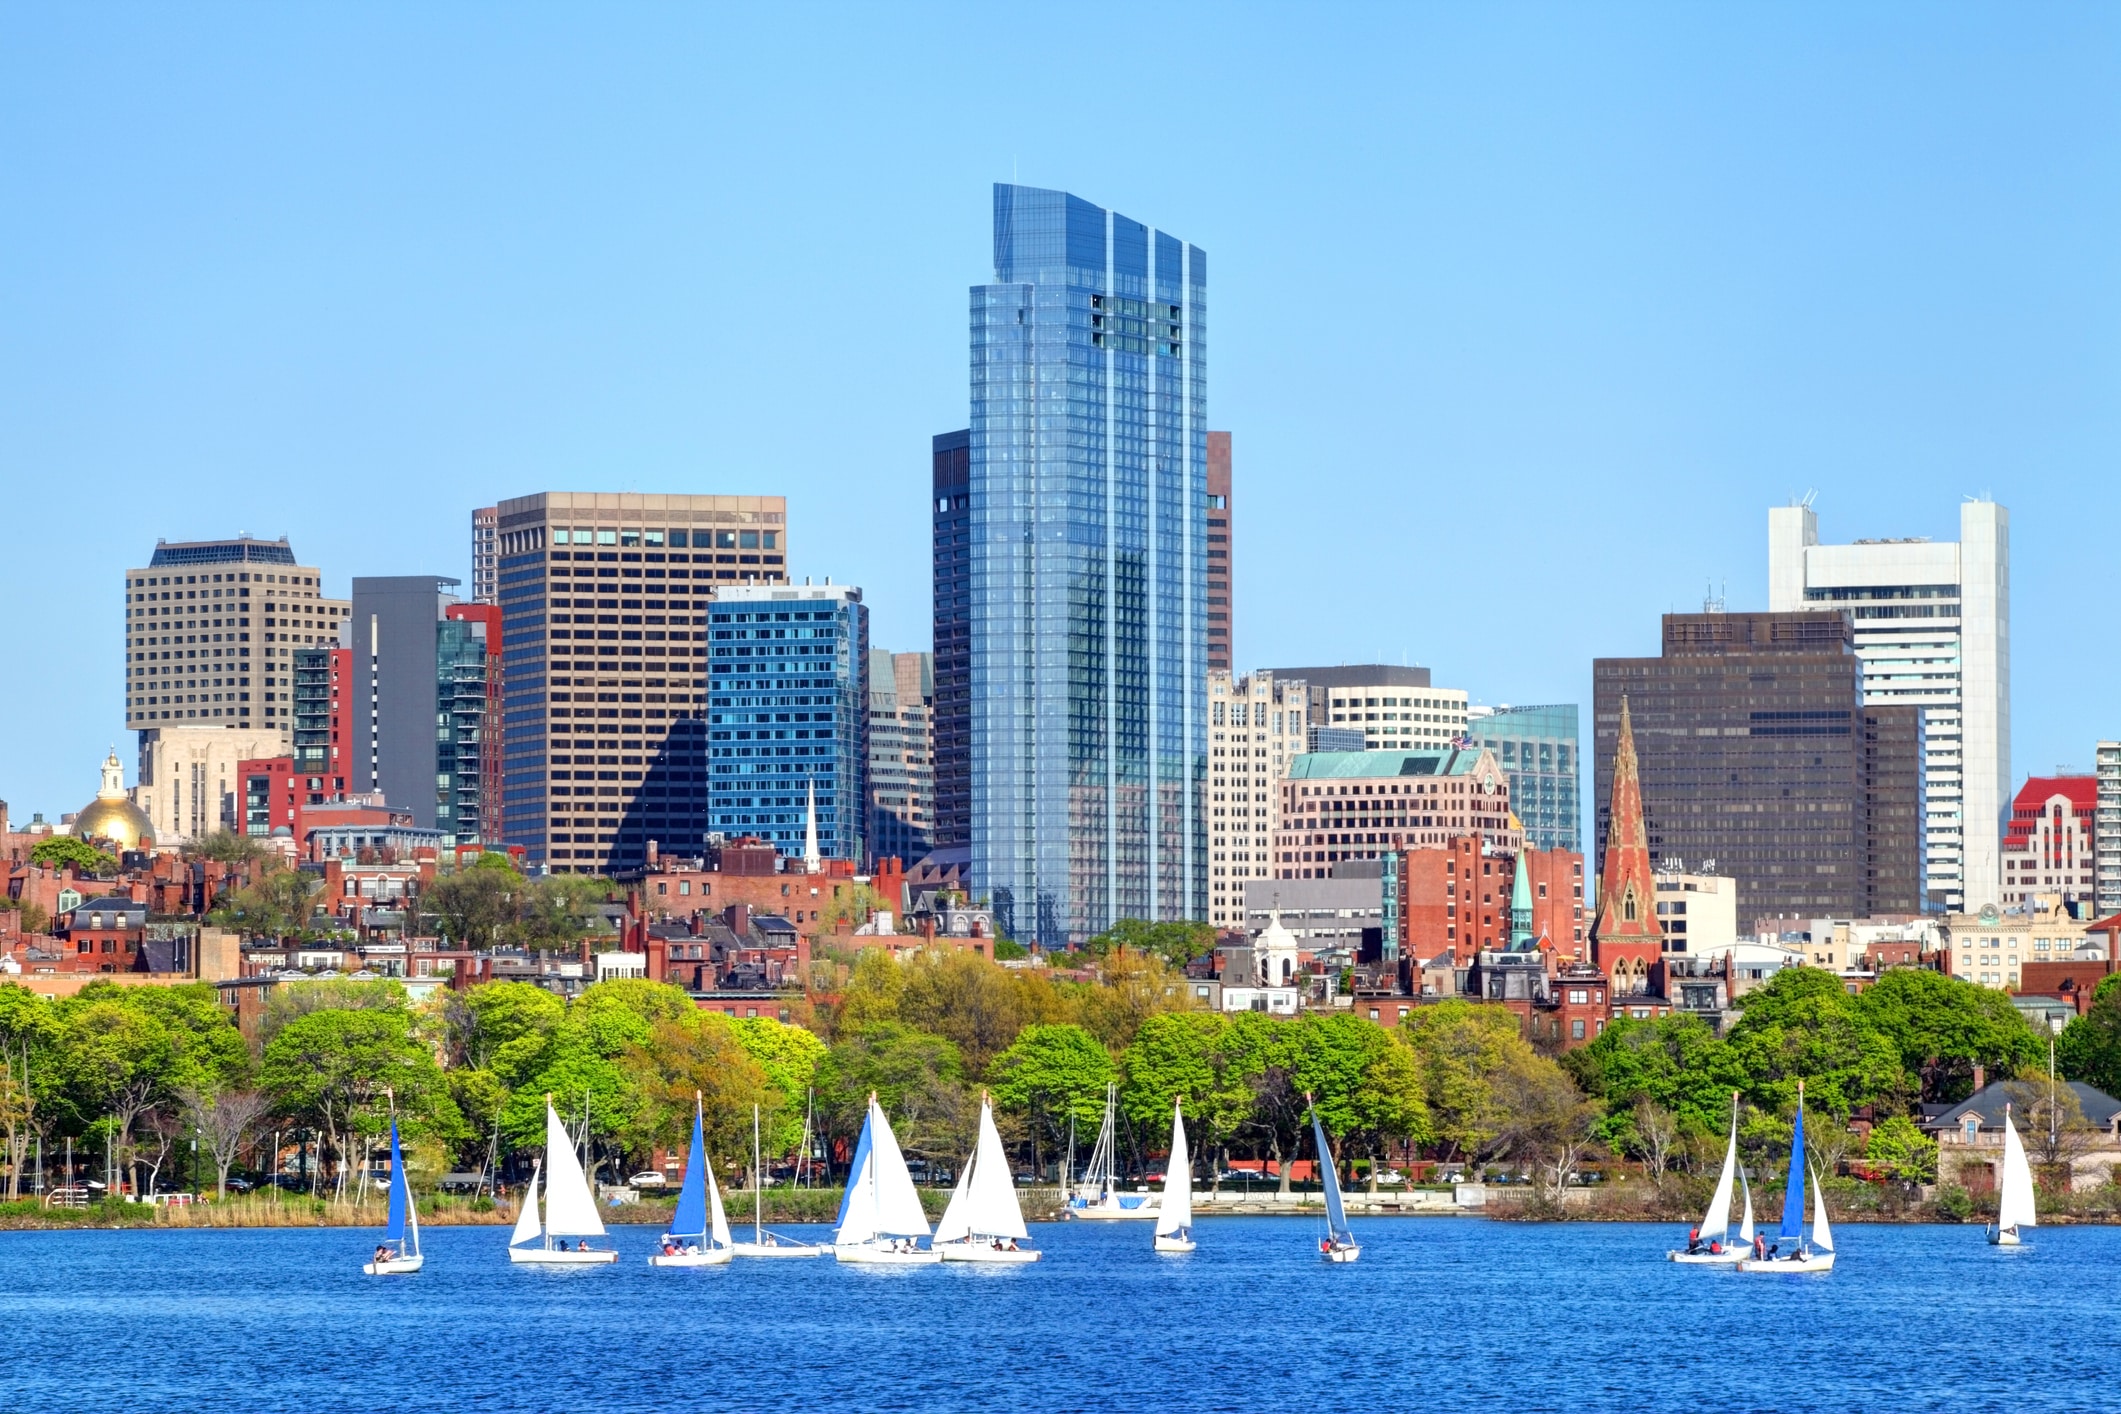 How to Get a Massachusetts Real Estate License in 4 Easy Steps